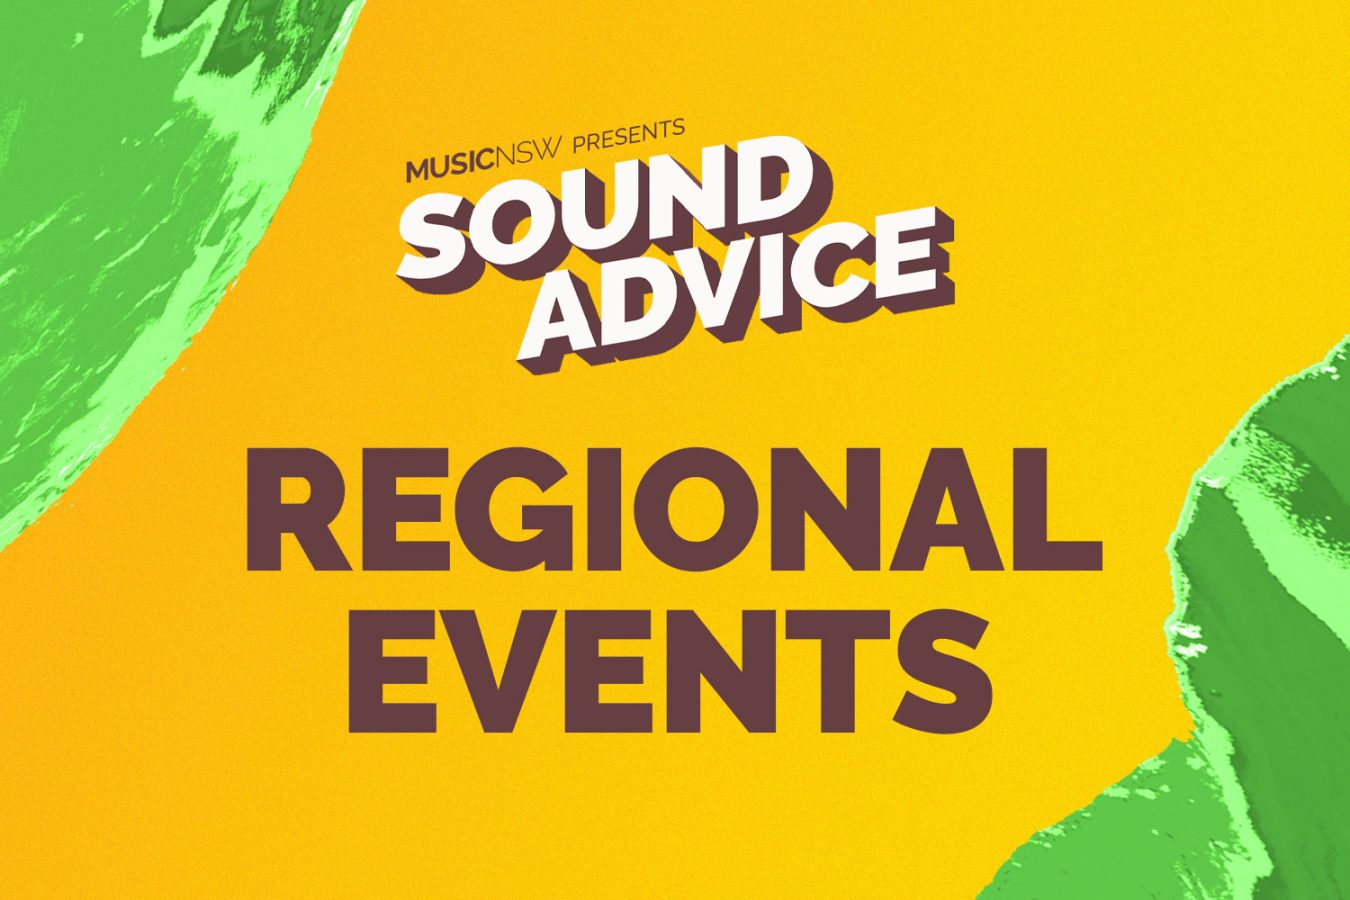 Yellow banner with Sound Advice logo, "Regional Events" text and green swirls